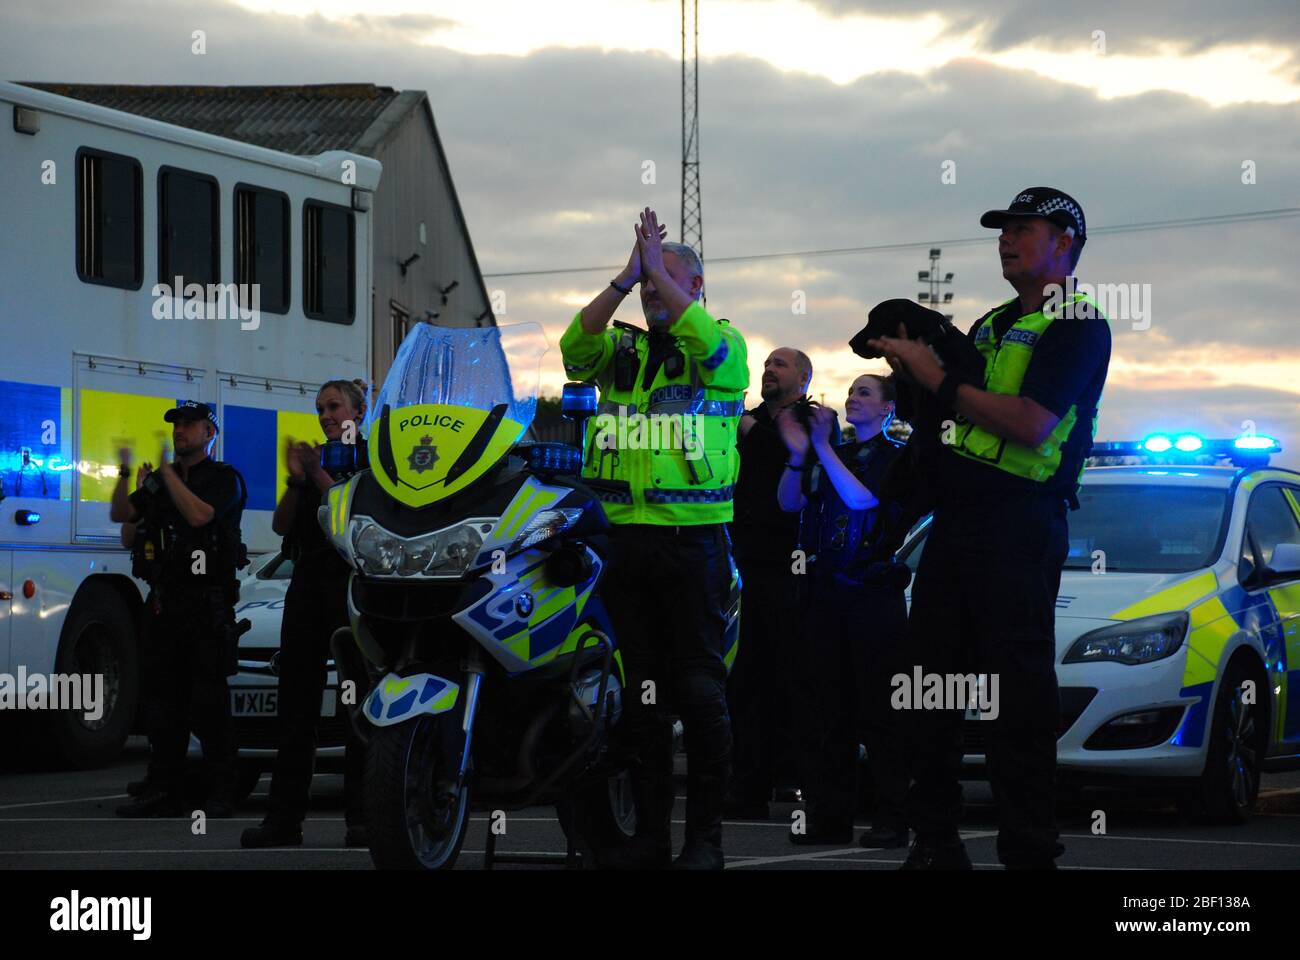 Traffic, firearms, patrol, mounted and dog units from Avon and Somerset Police join in the applause in Clevedon, Somerset, to salute local heroes during Thursday's nationwide Clap for Carers initiative to recognise and support NHS workers and carers fighting the coronavirus pandemic. Stock Photo